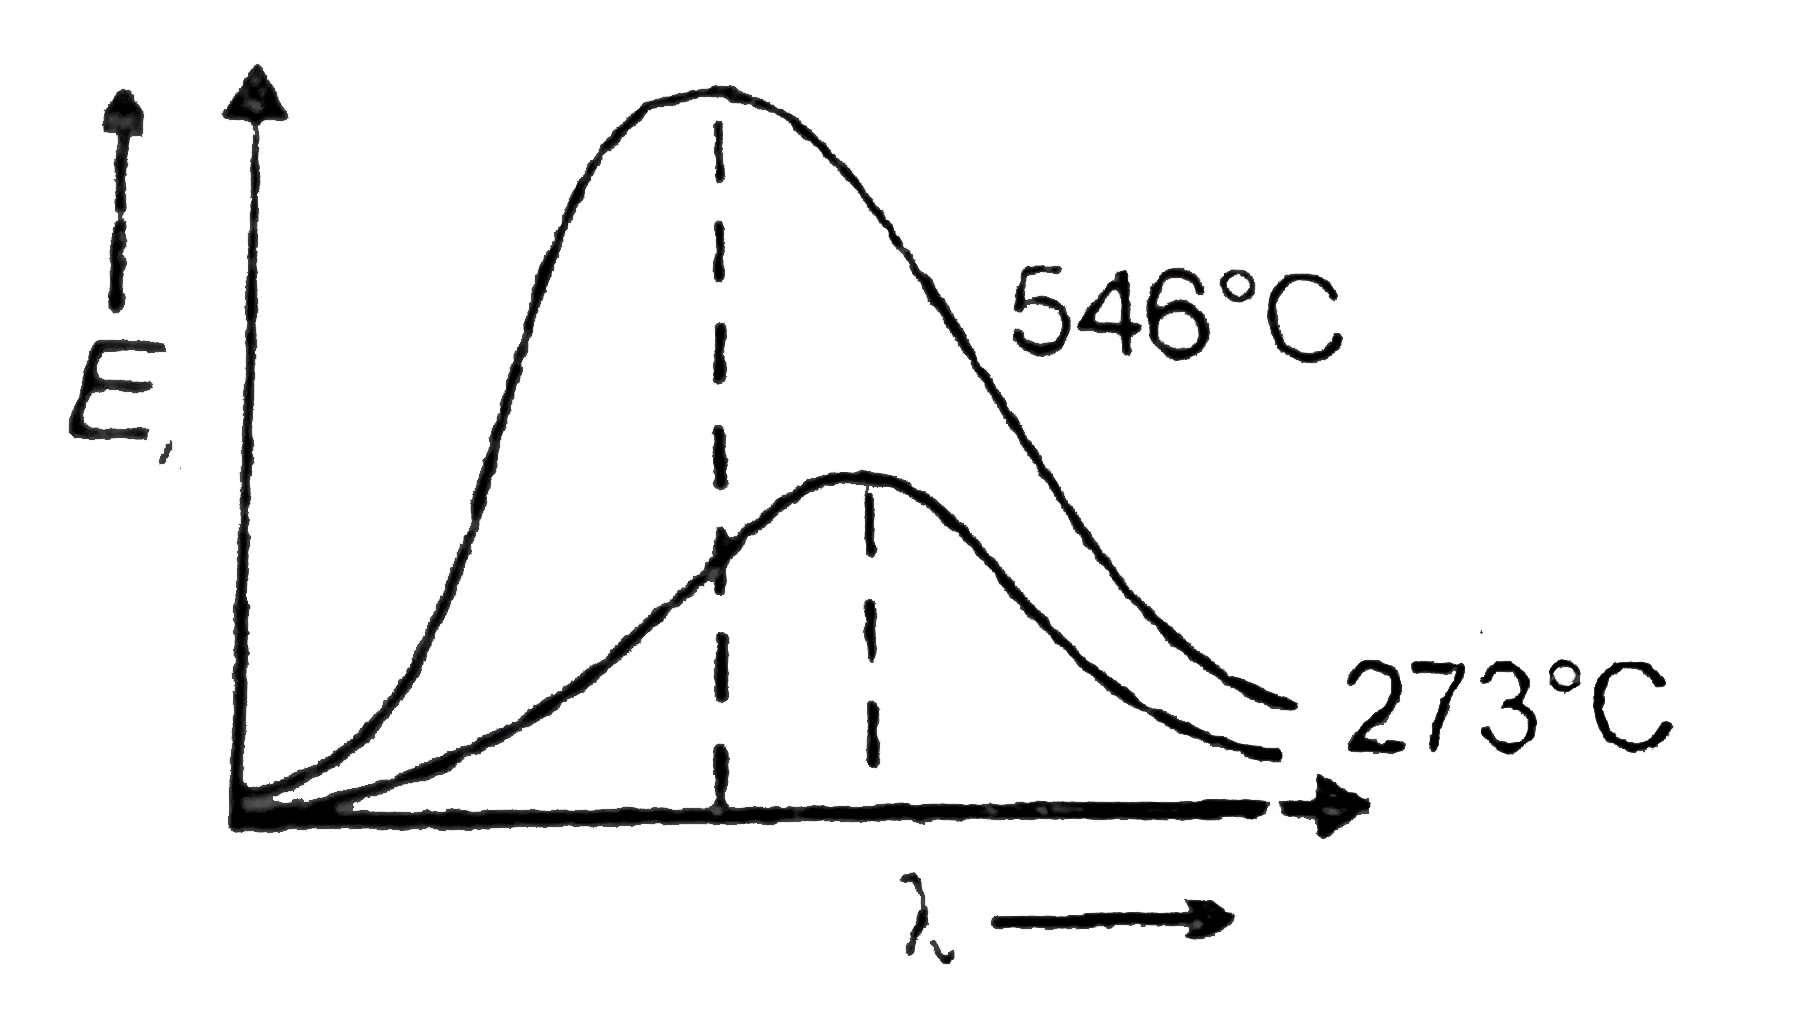 The spectra of a black body at temperatures 273^(@)C and 546^(@)C are shown in the figure. If A(1) and A(2) be area under the two curves respectively, the value of (A(2))/(A(1)) is